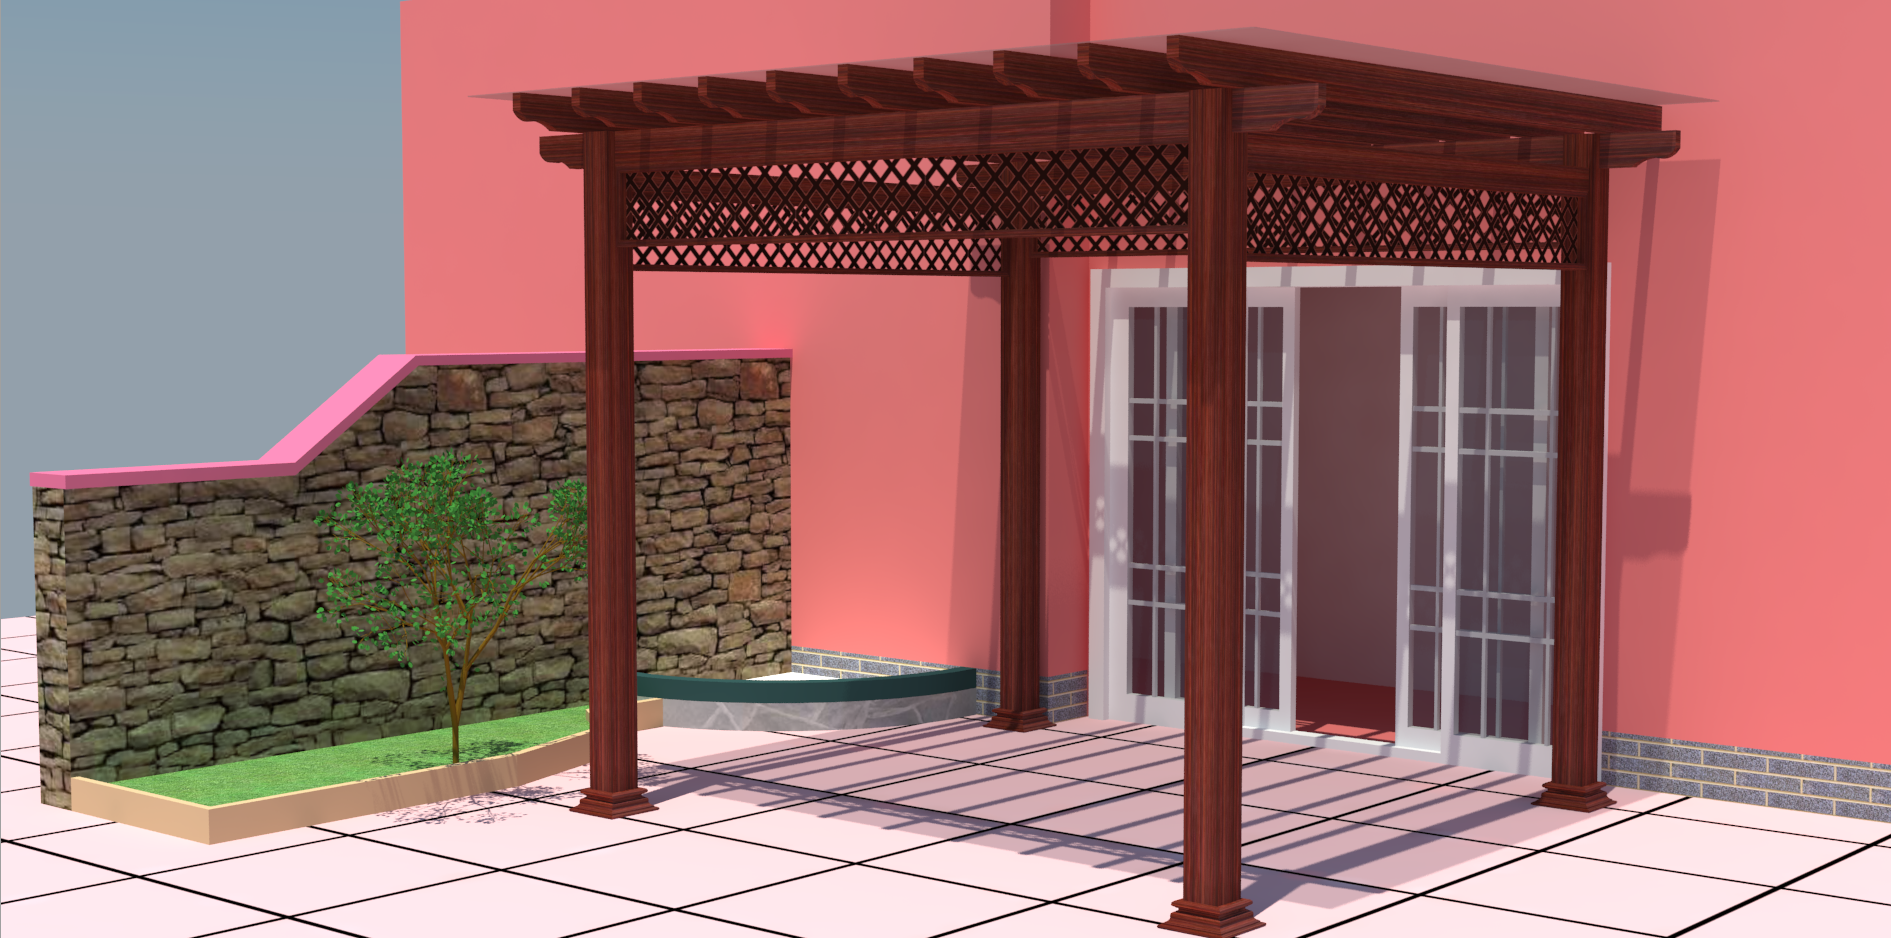 3D drawing for customers' house replace pergola